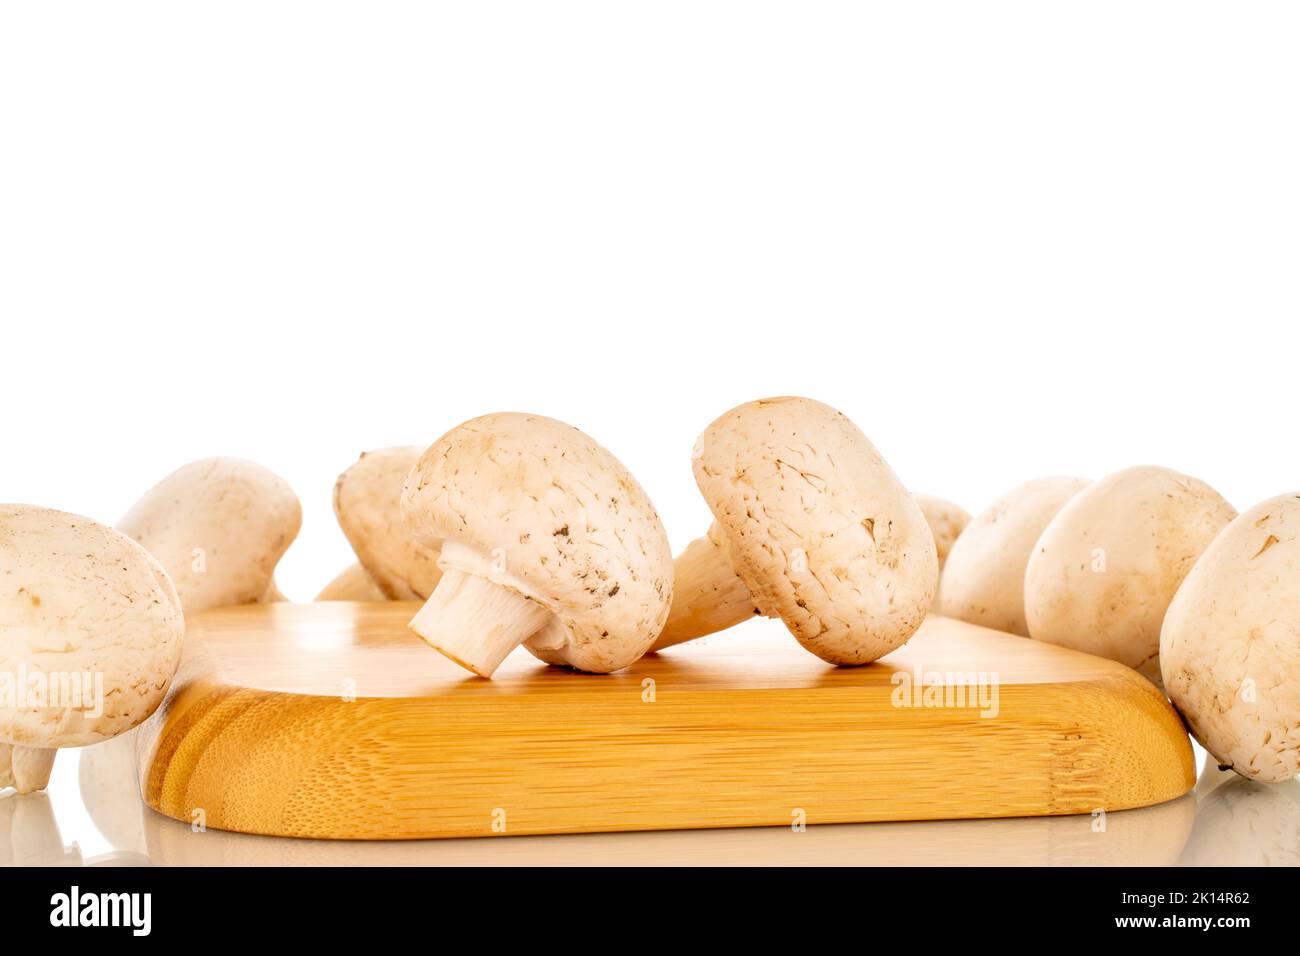 Several fresh mushrooms on a wooden tray, close-up, isolated on a white background. Stock Photo